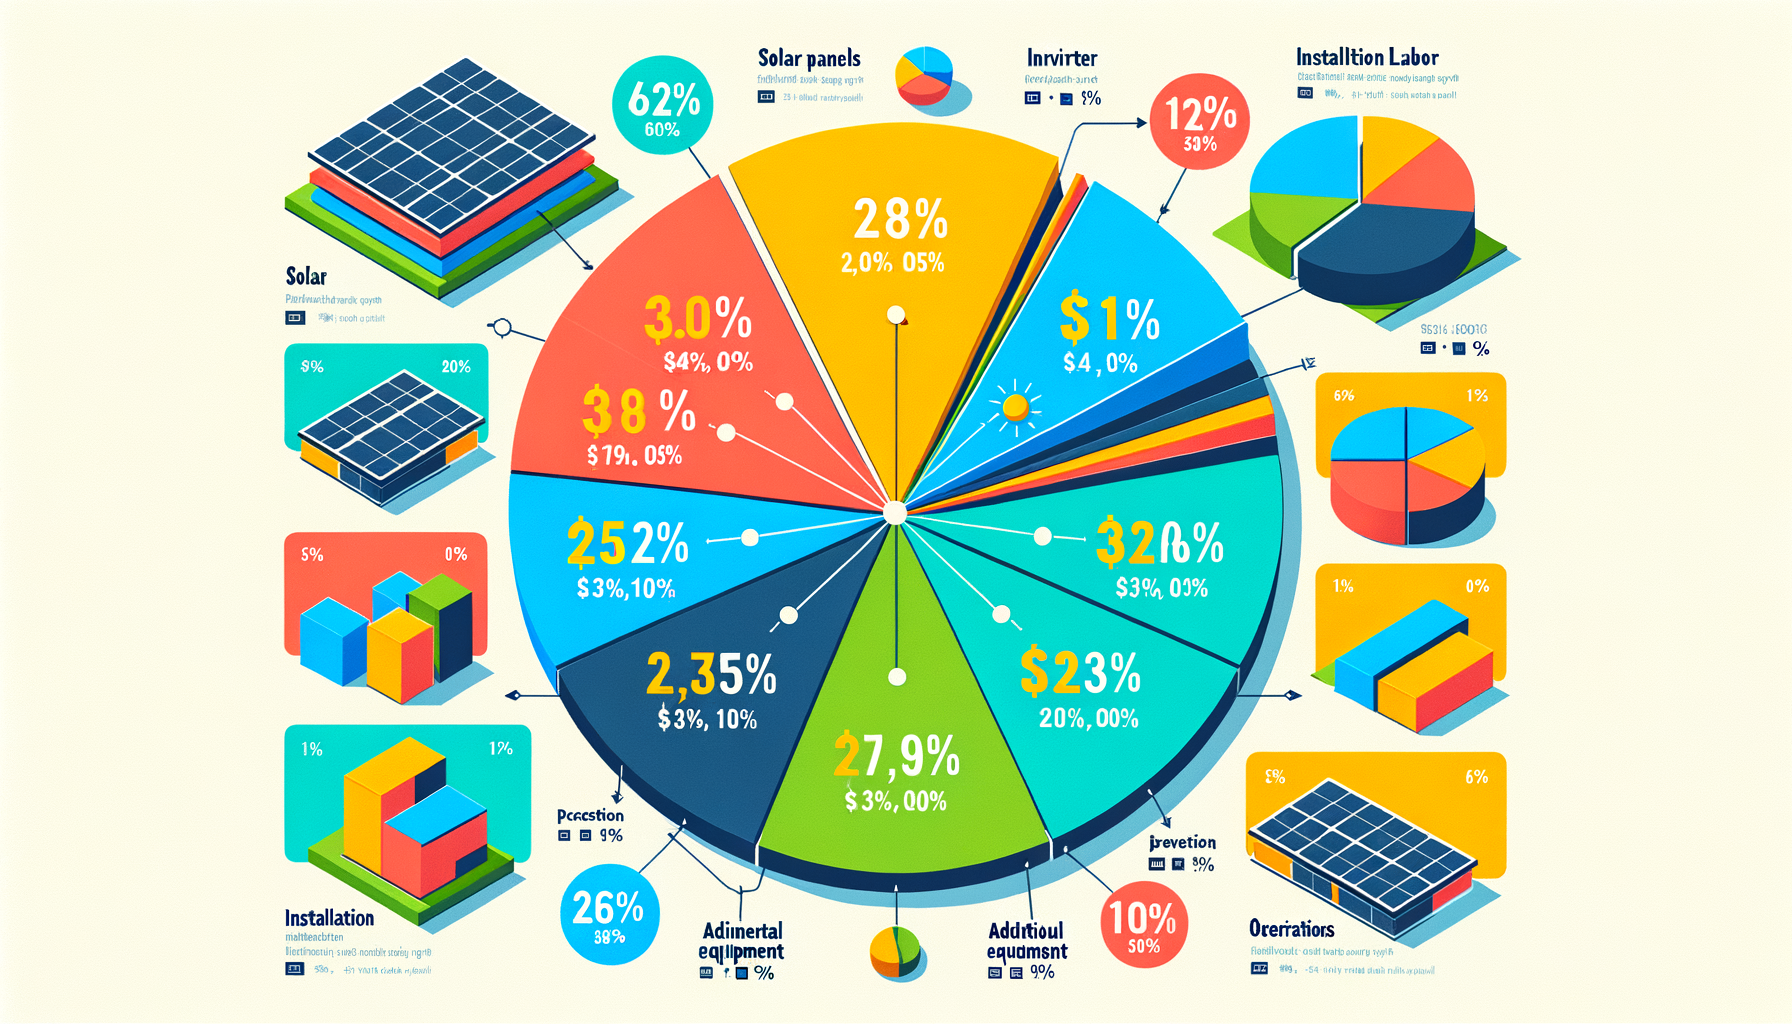 ALT: Detailed chart showing the cost distribution in solar installation